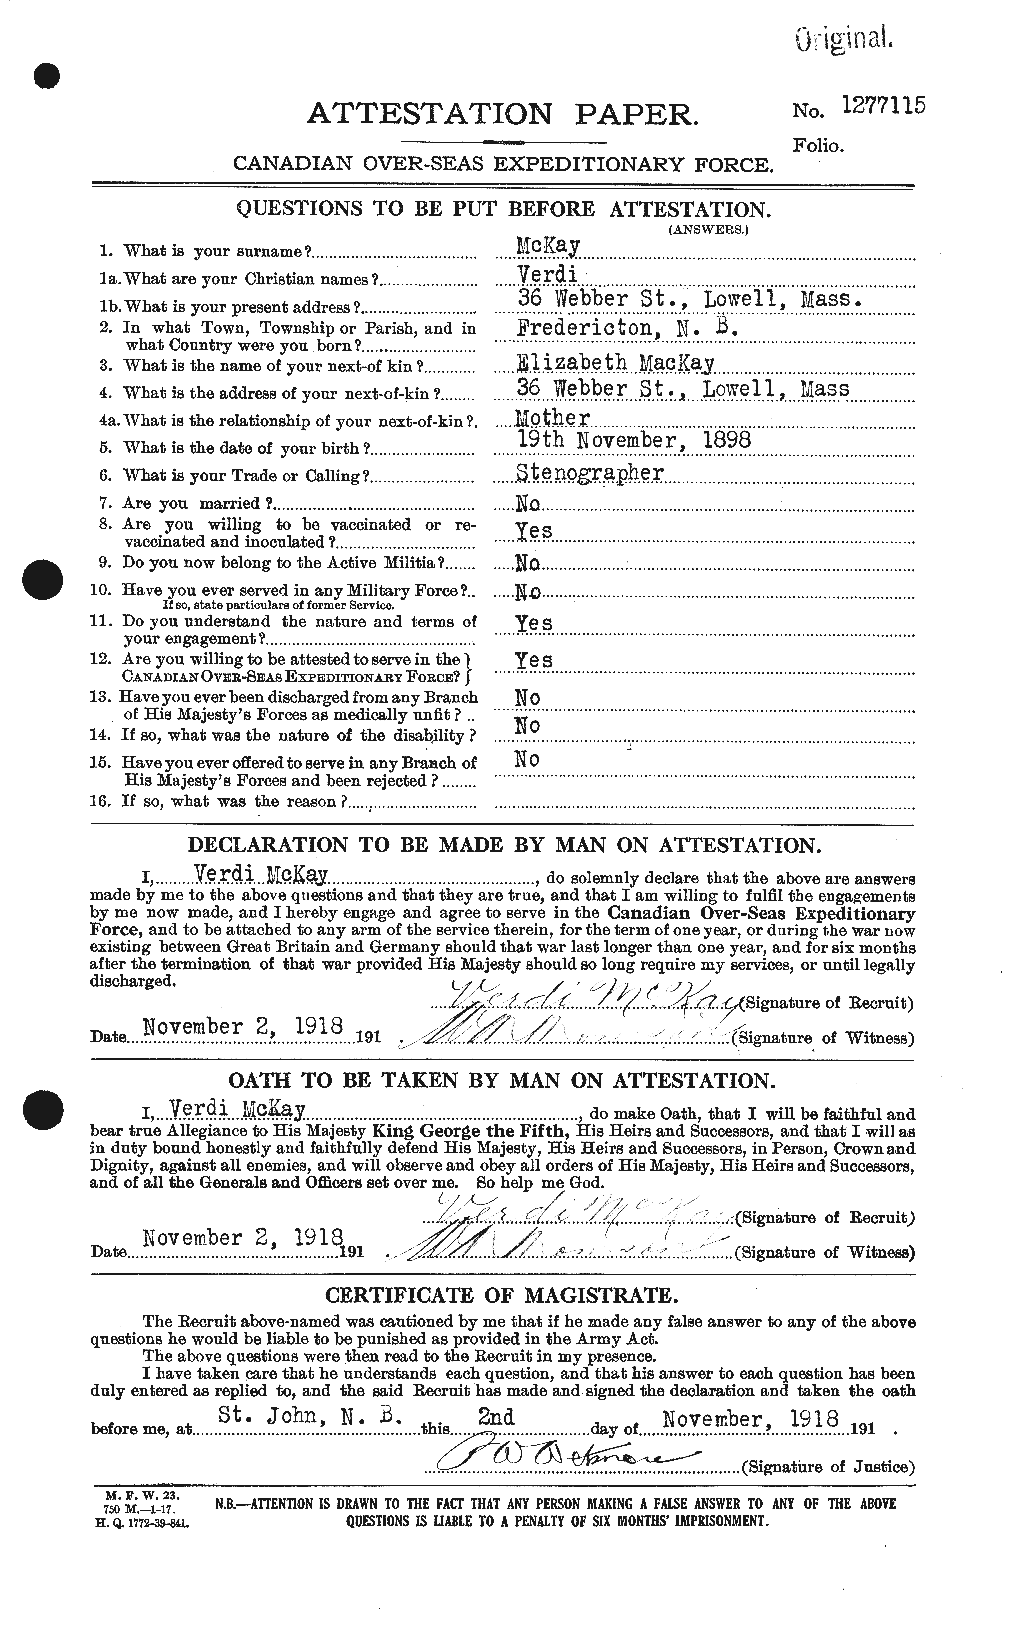 Personnel Records of the First World War - CEF 530179a